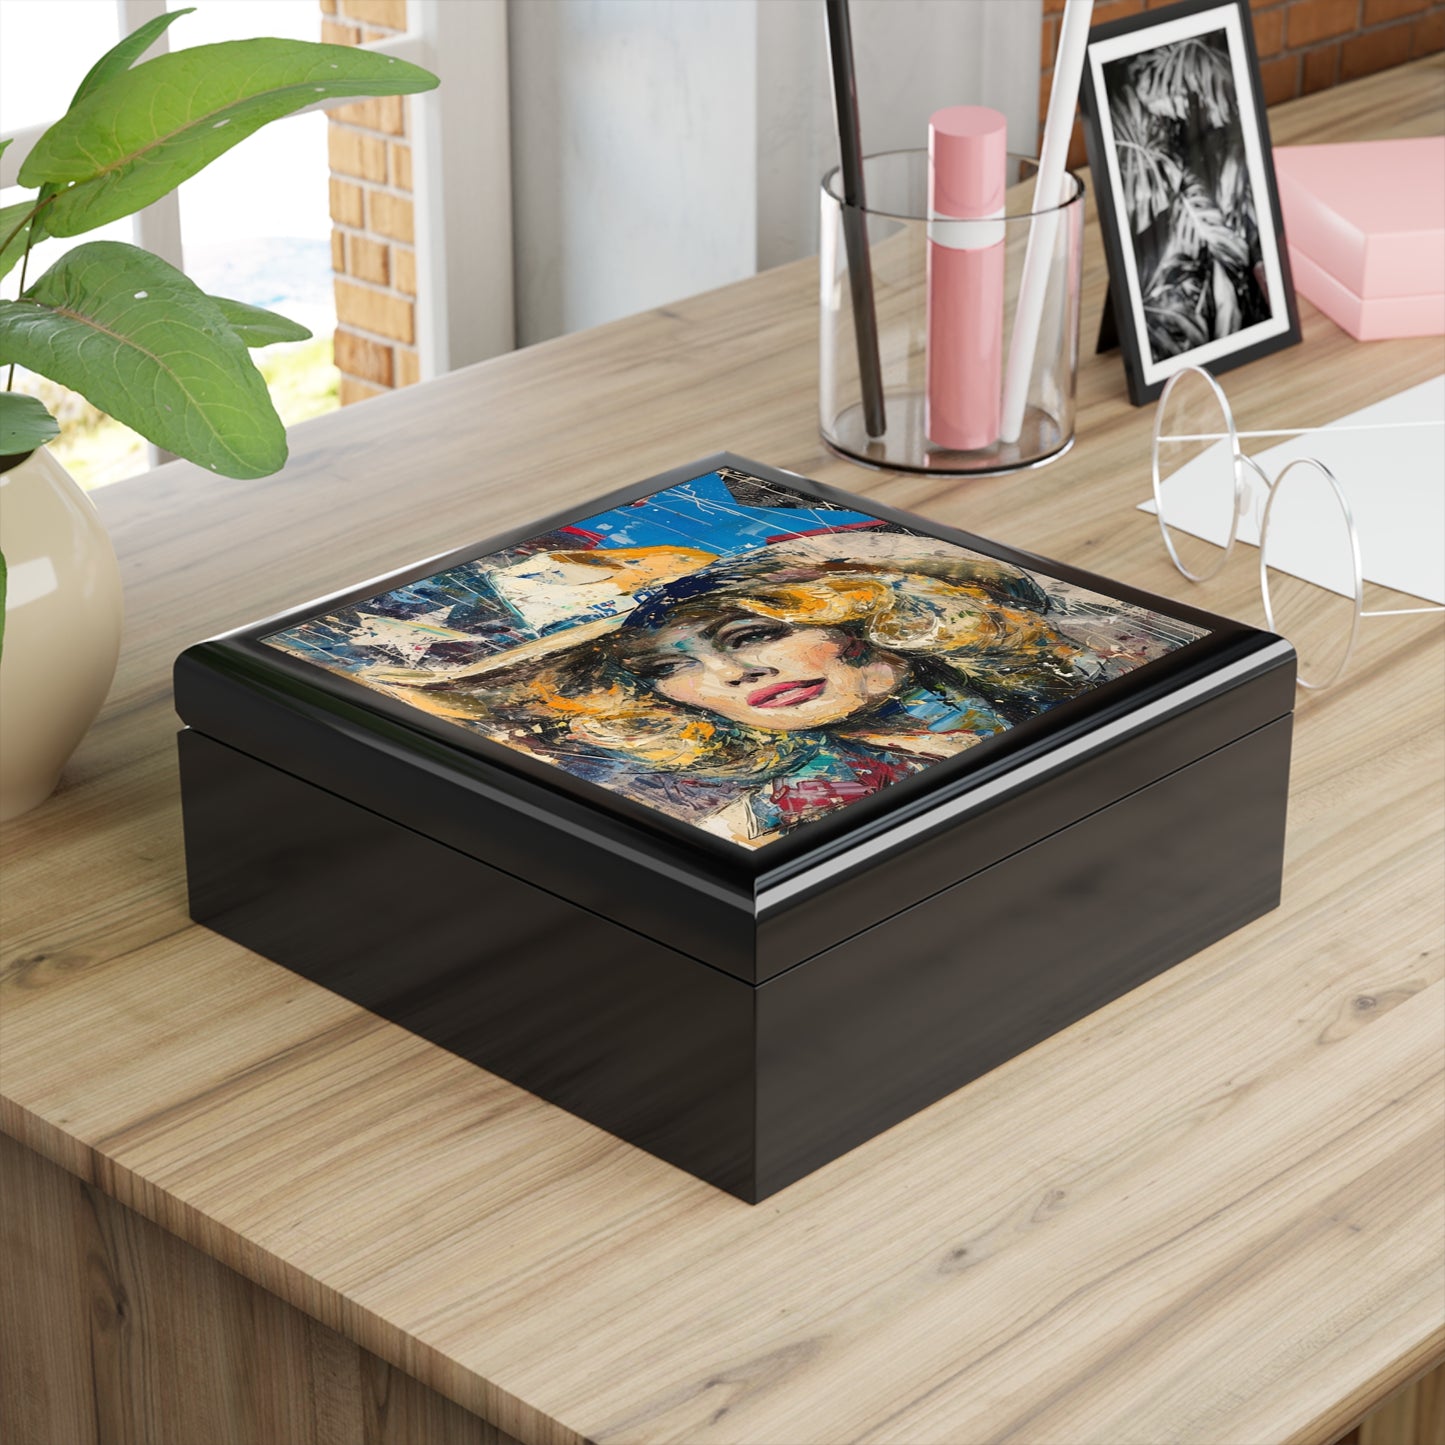 Jewelry Box - Country Queen Black in situ